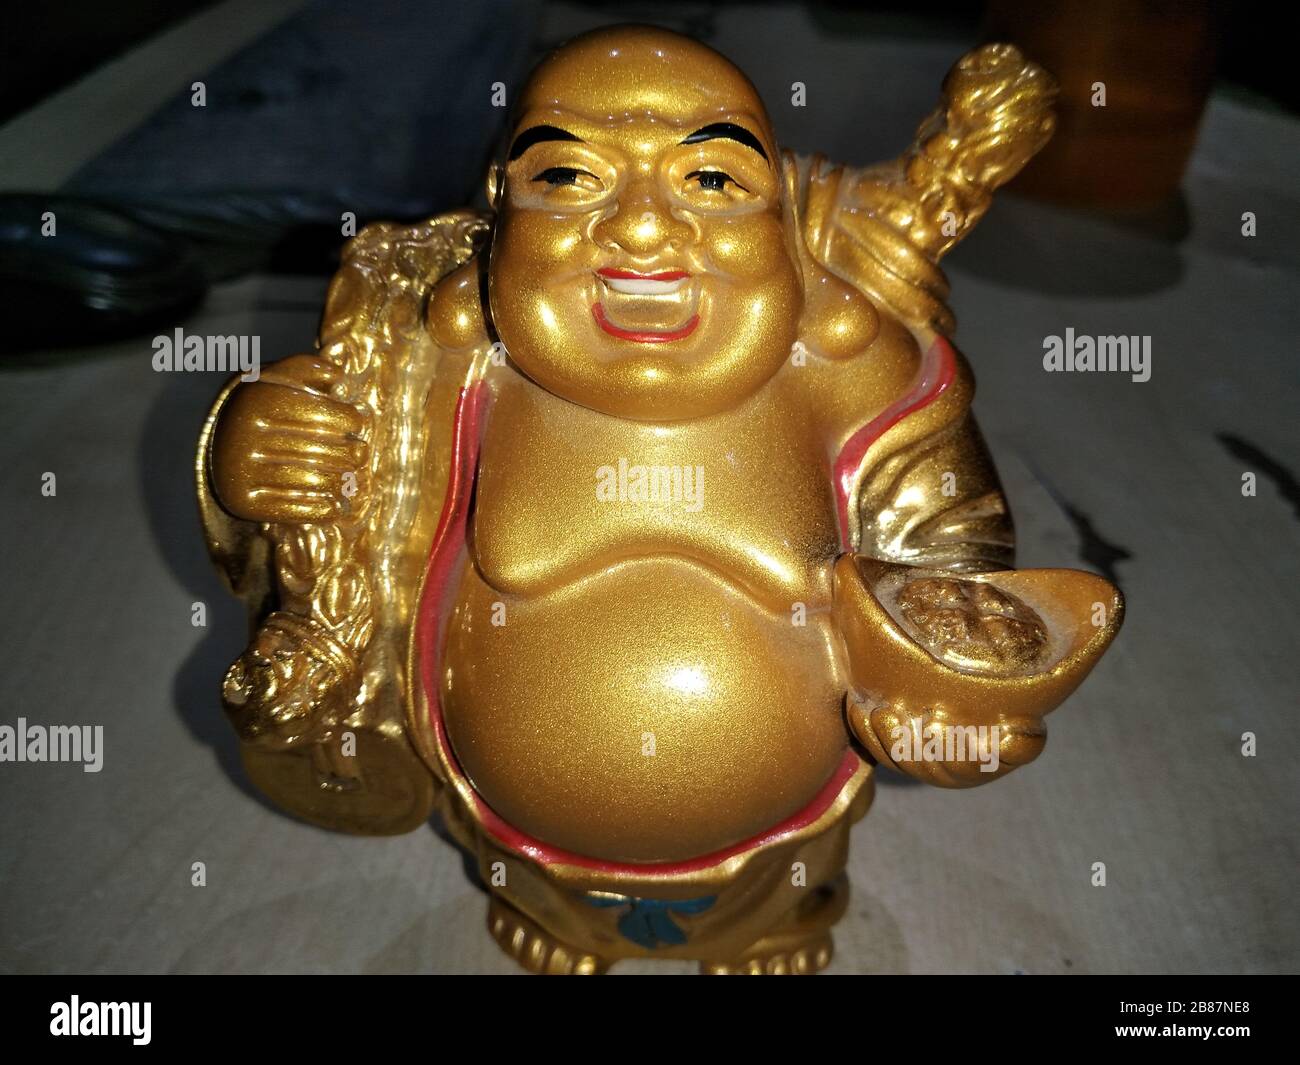 A picture of laughing budha statue Stock Photo